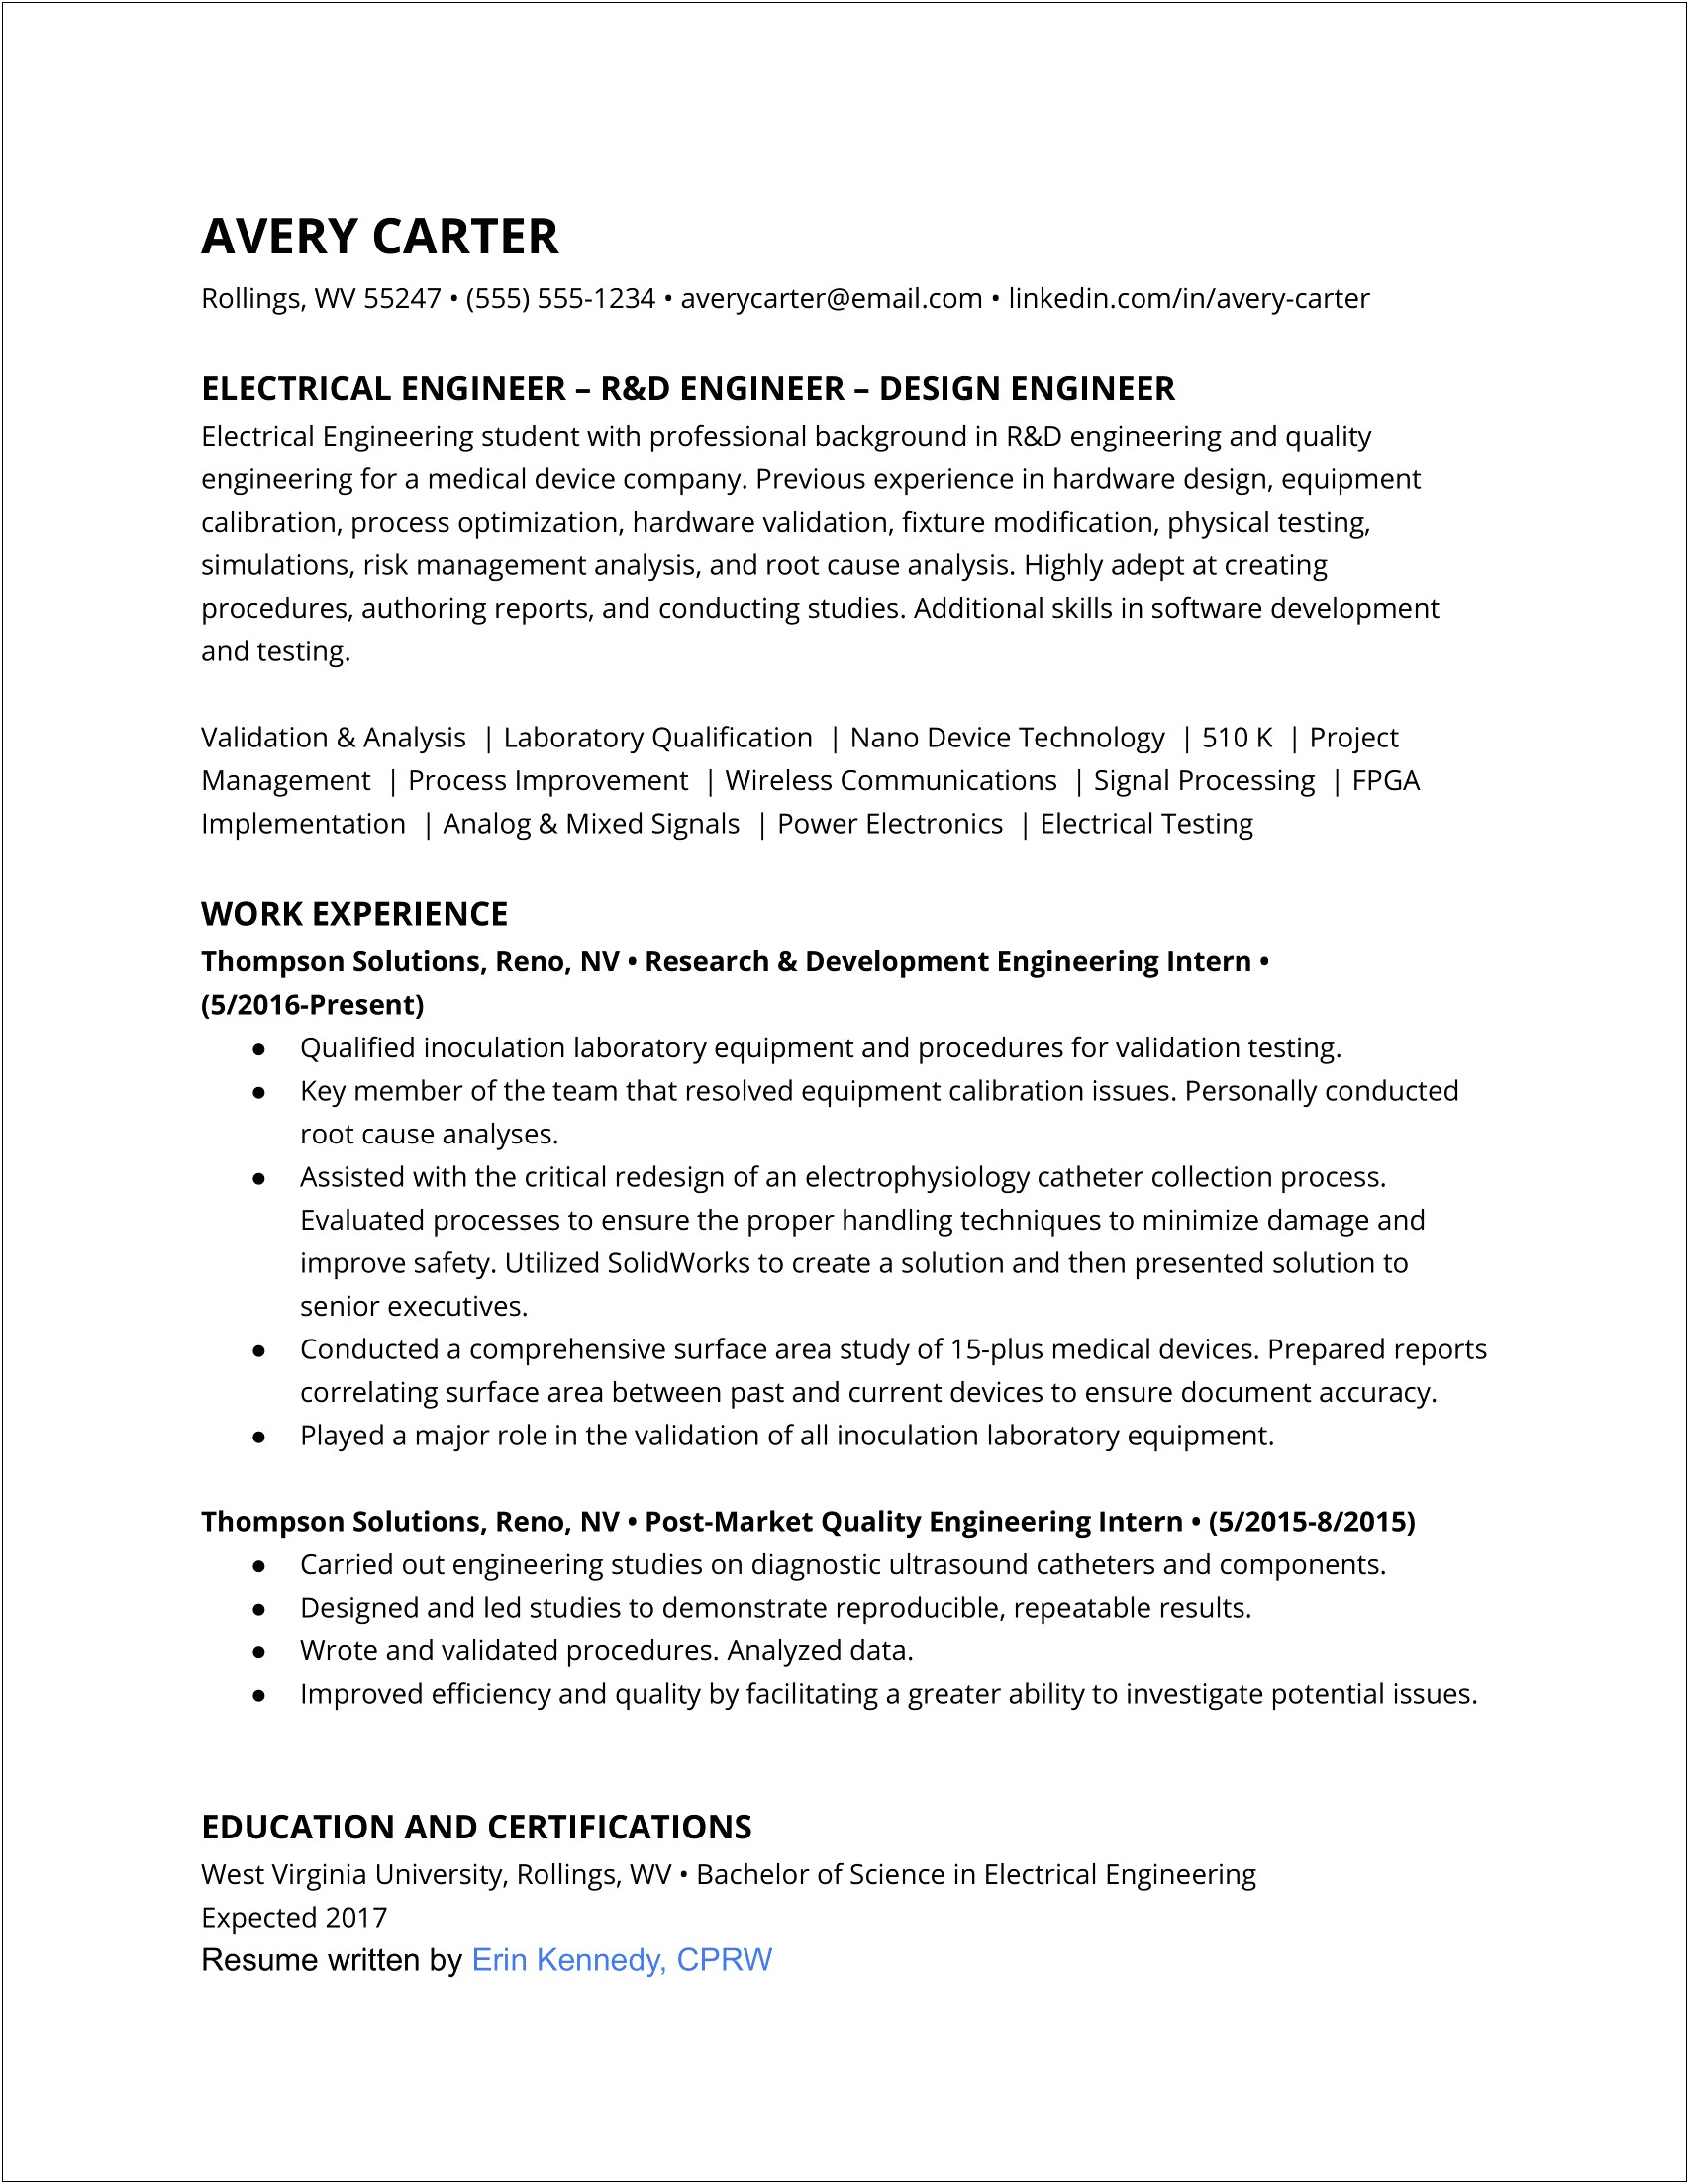 Resume Objective For 1 Year Experience Engineering